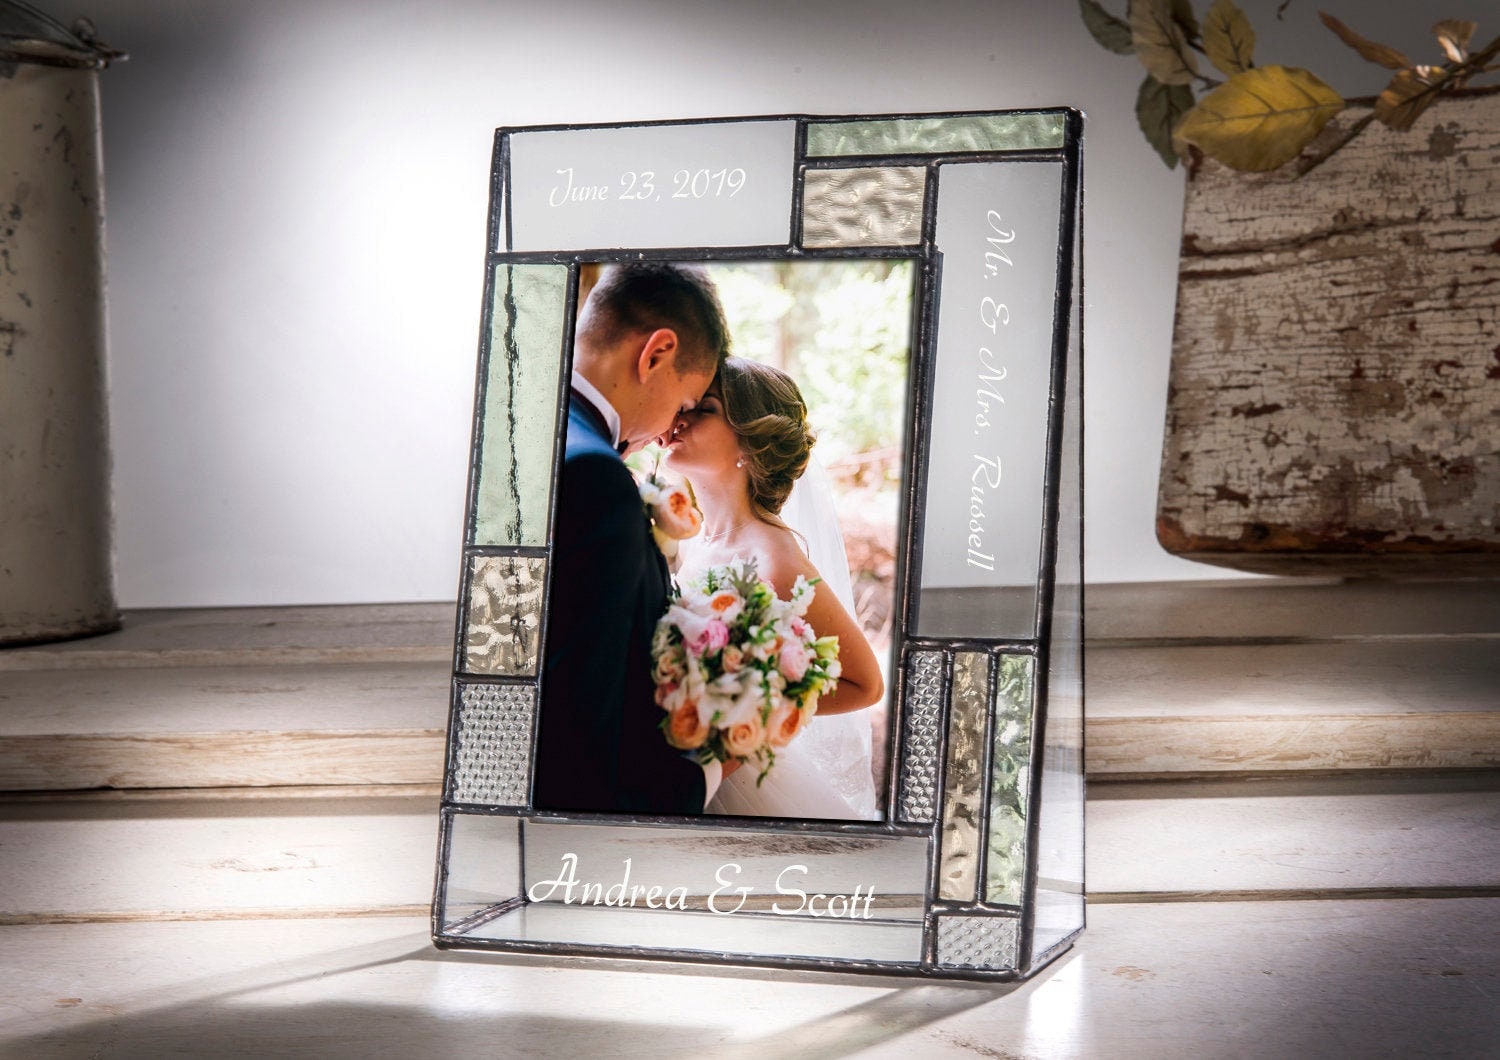 Personalized Metal Picture Frames 4x6 5x7 8x10 Custom Wedding Couple Presents 